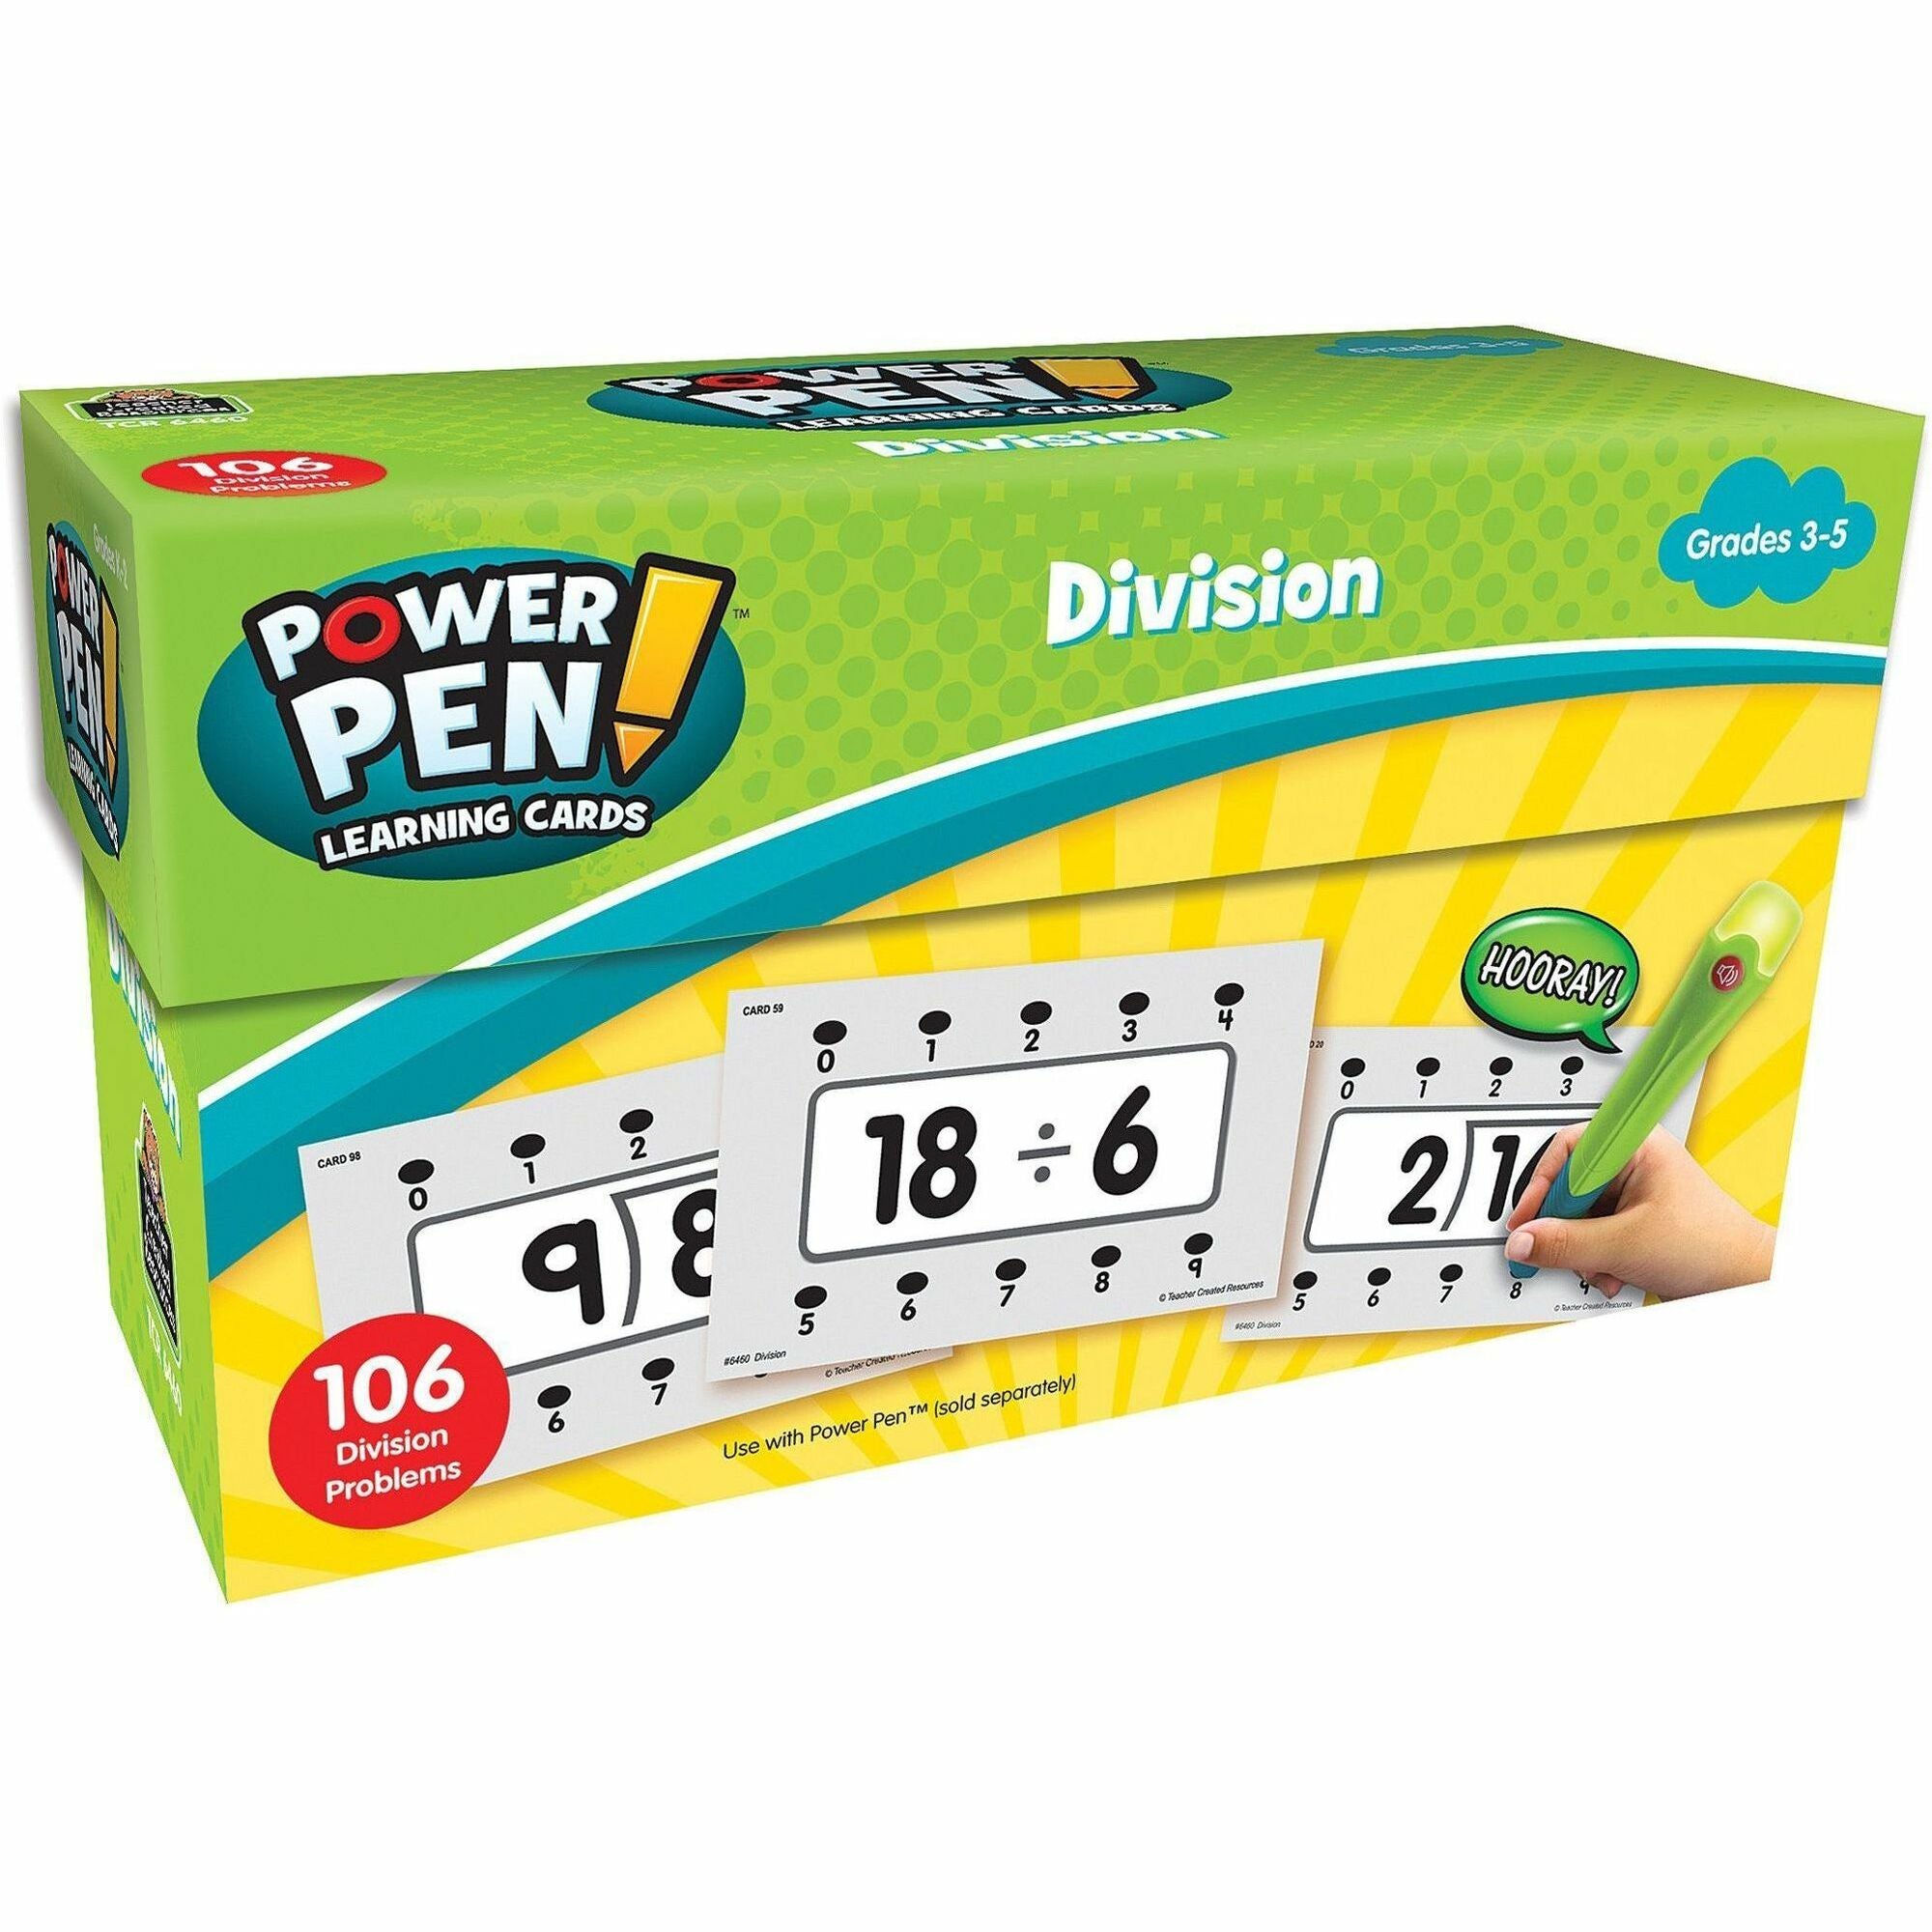 Teacher Created Resources Power Pen Division Cards - Theme/Subject: Learning - Skill Learning: Division - 53 Pieces - 1 Each - 